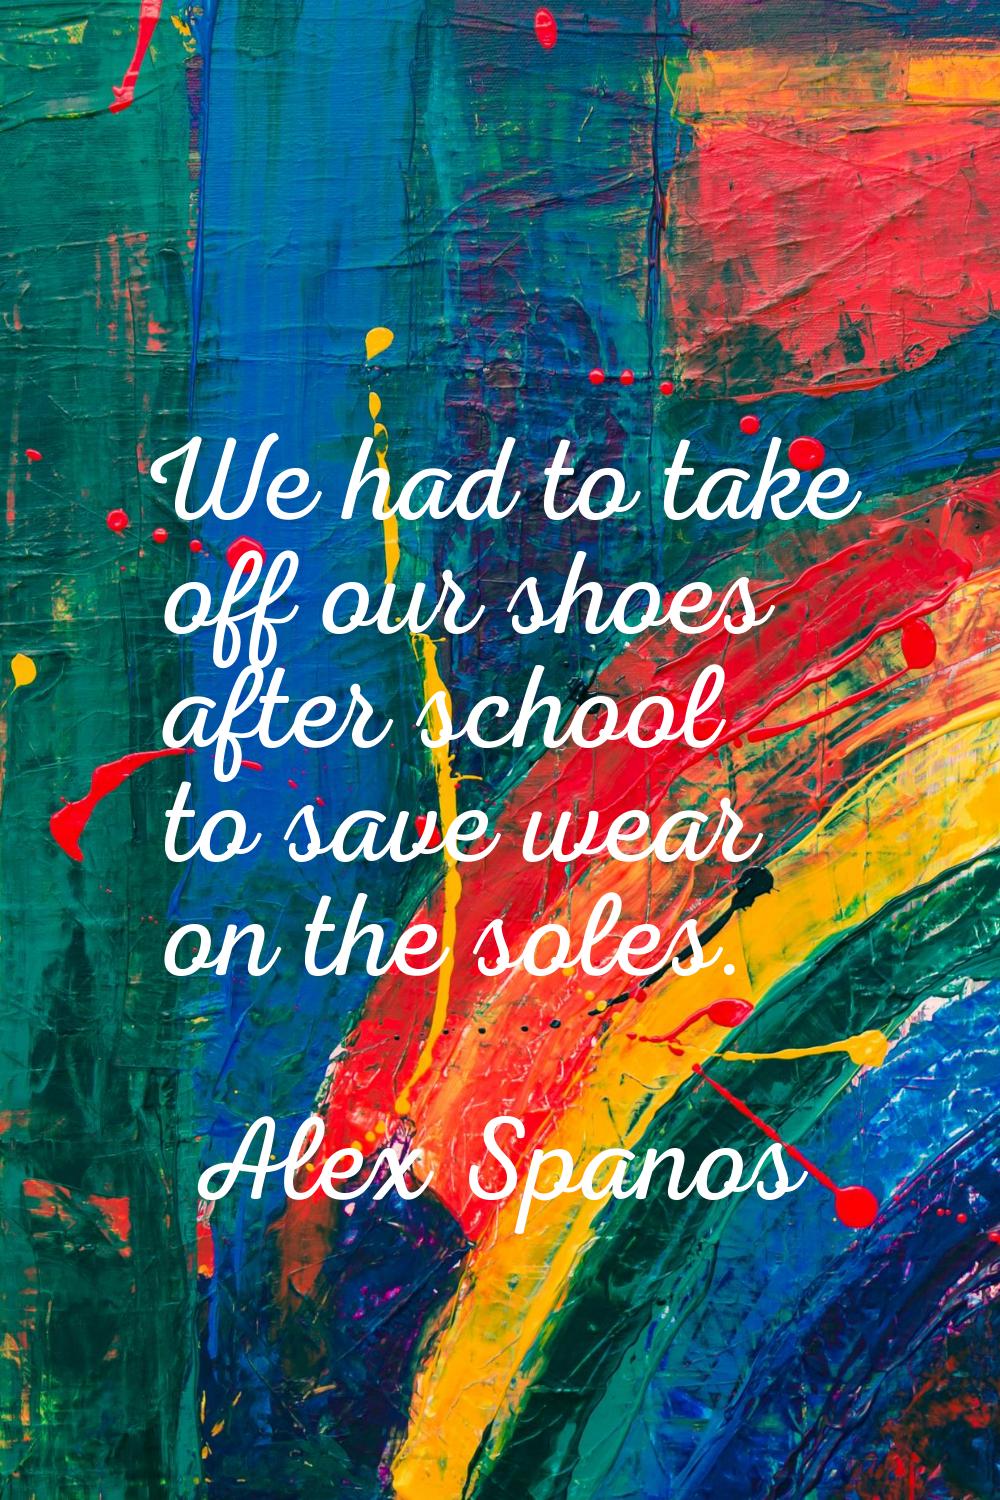 We had to take off our shoes after school to save wear on the soles.